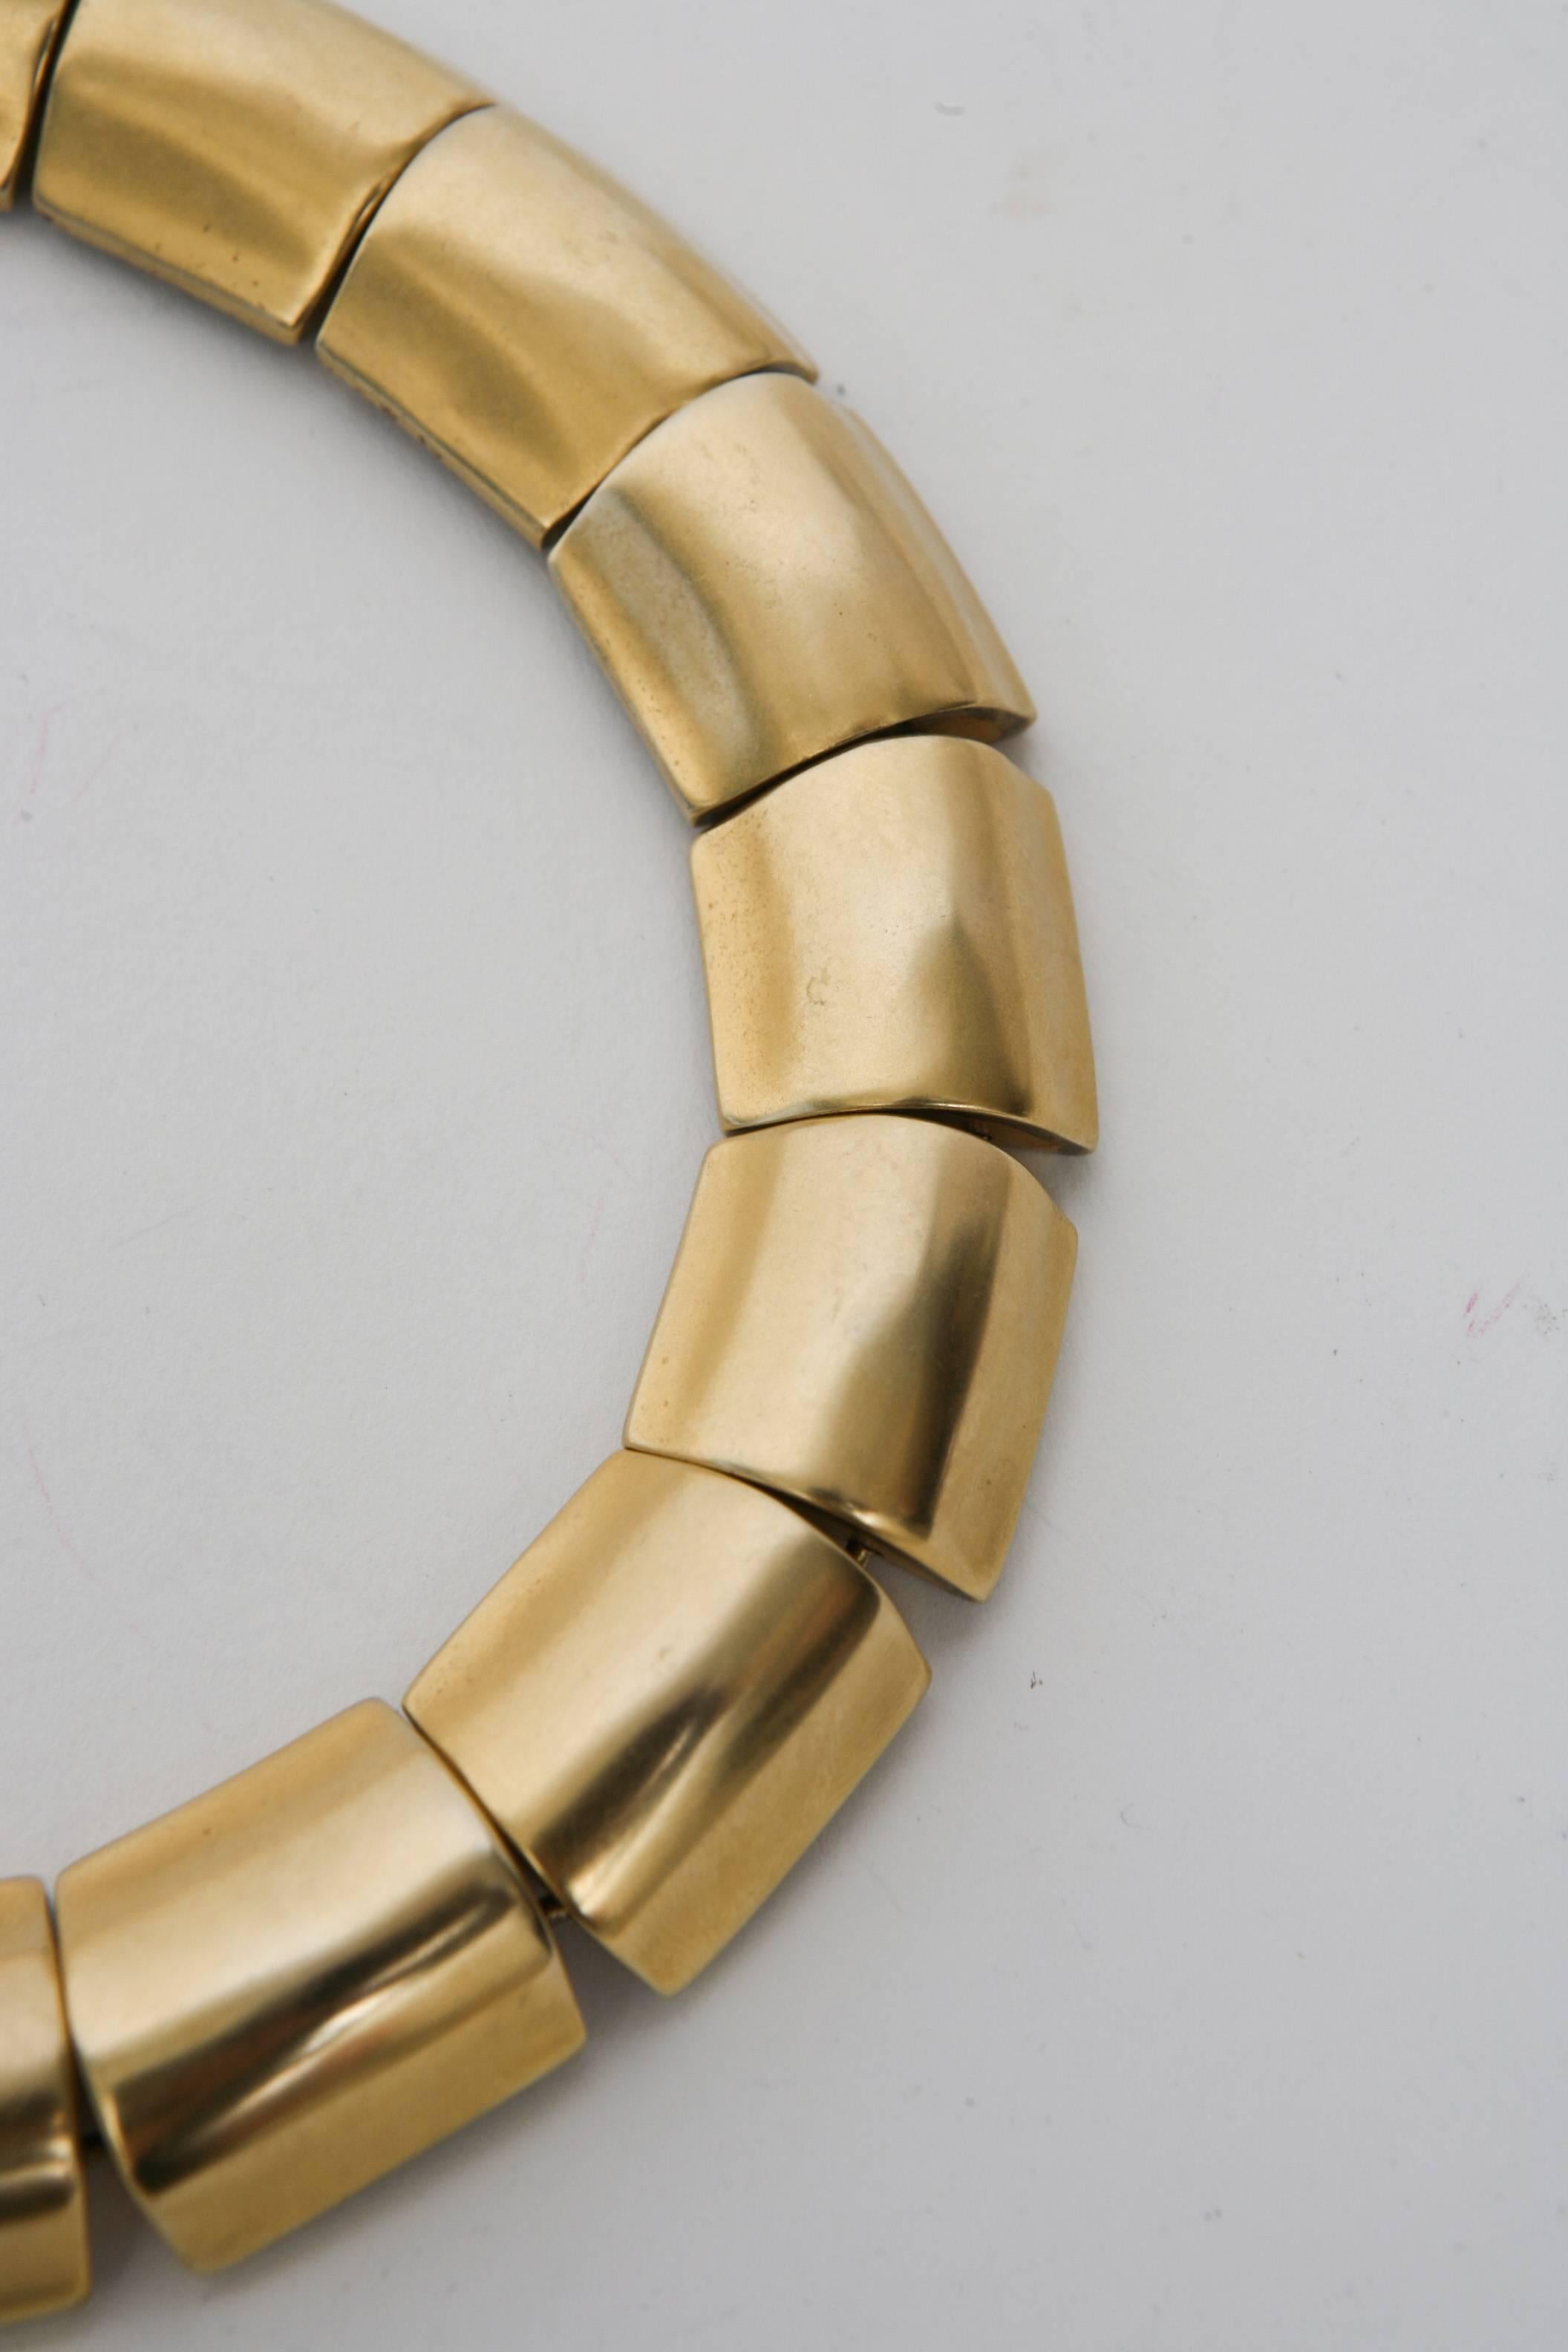 This unsigned but attributed Robert Lee Morris sculptural collar link choker necklace is stunning and timeless. It needs a small neck in order to fit. It sits high on the neck and fits tight. It is gold plated and each link is 1